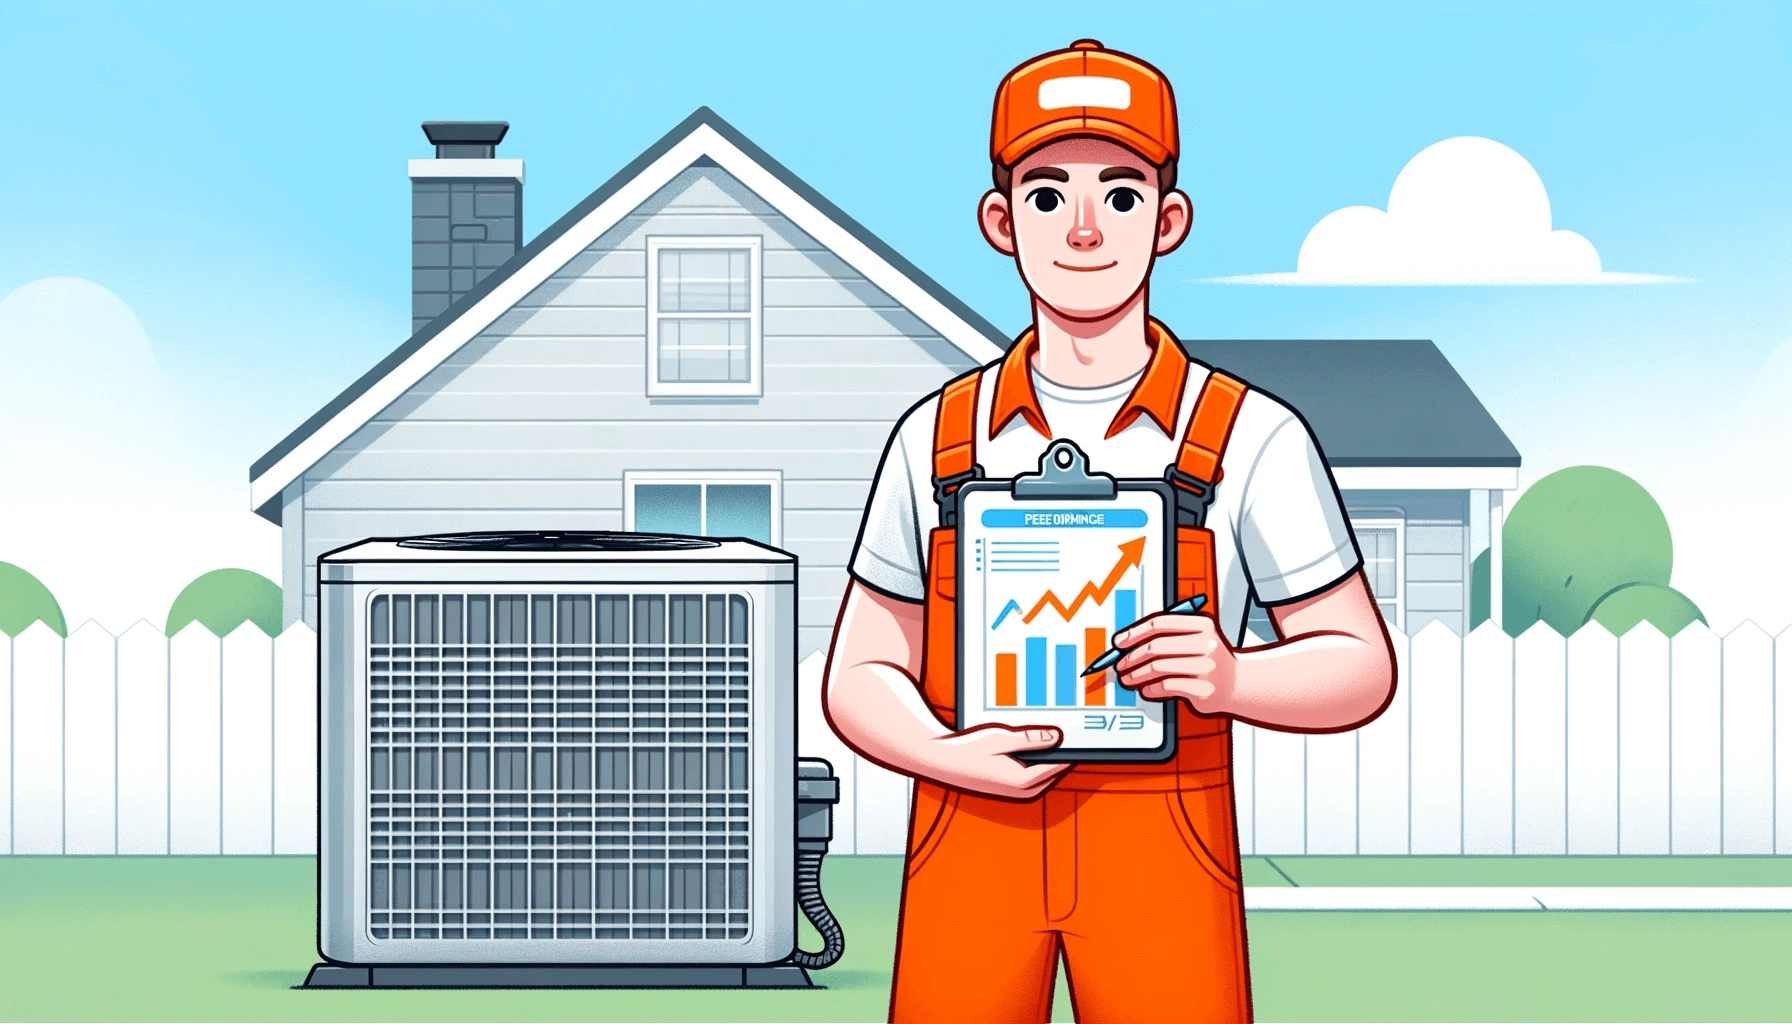 graphic featuring a White male HVAC technician with a clipboard that has performance graphs with upward trends.